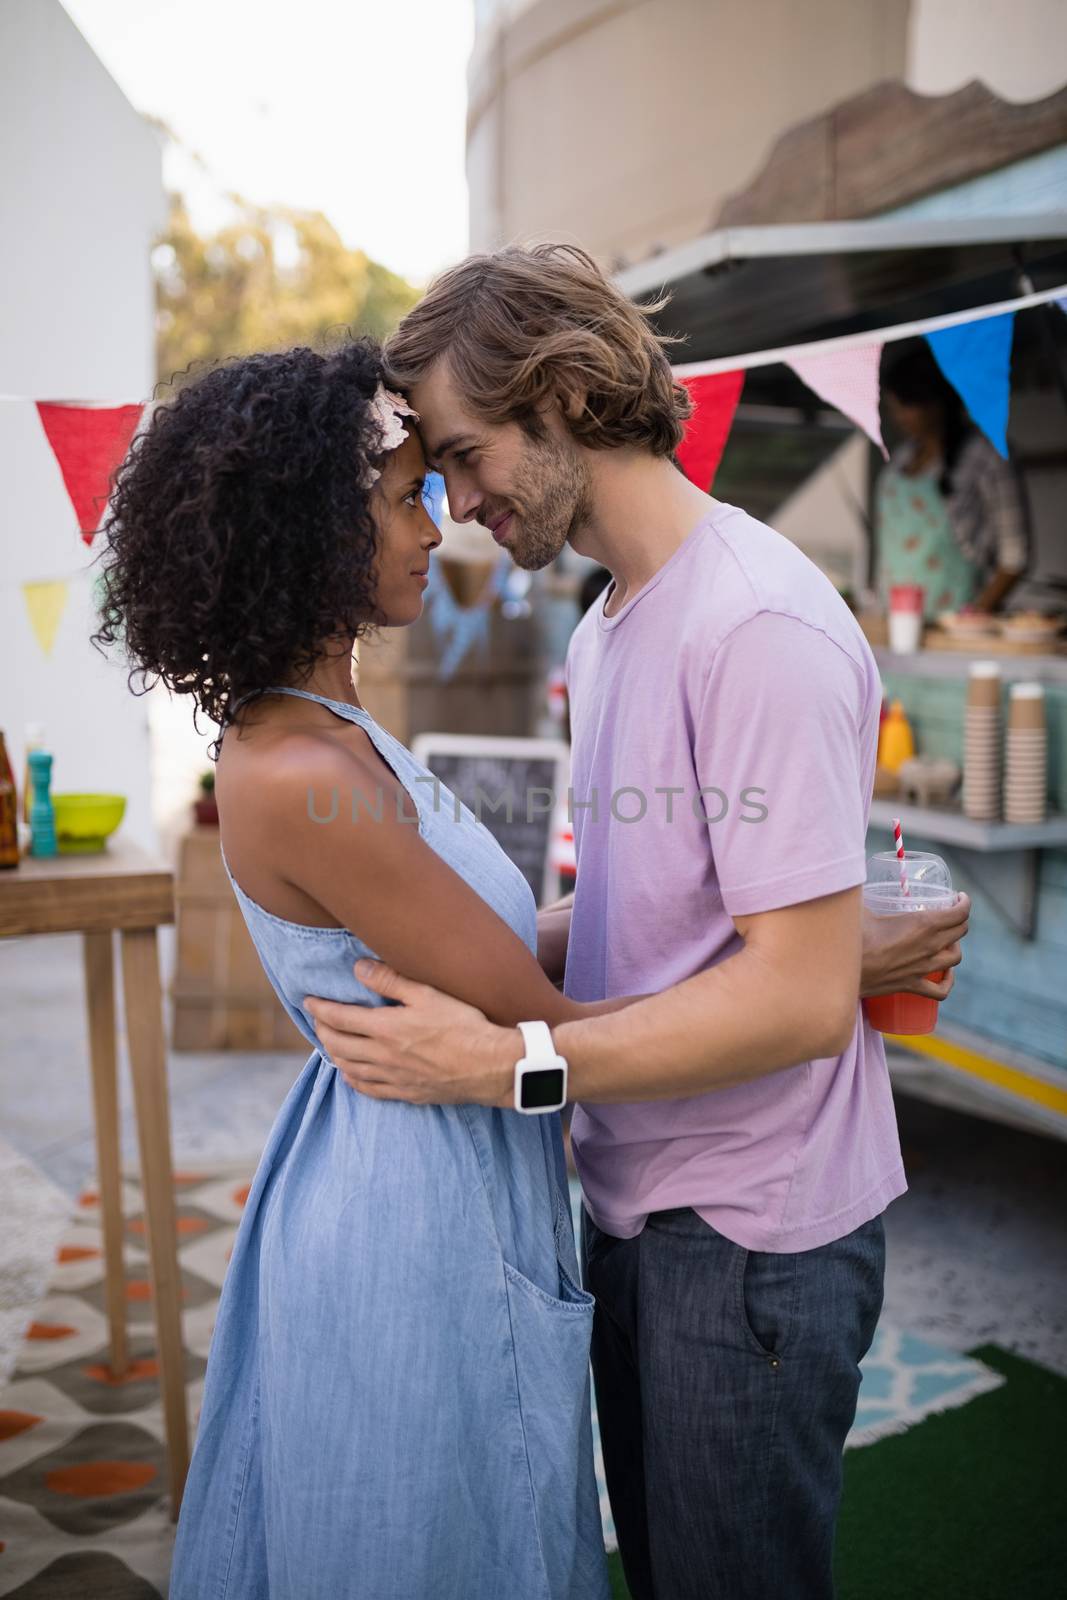 Romantic couple embracing each other near food truck